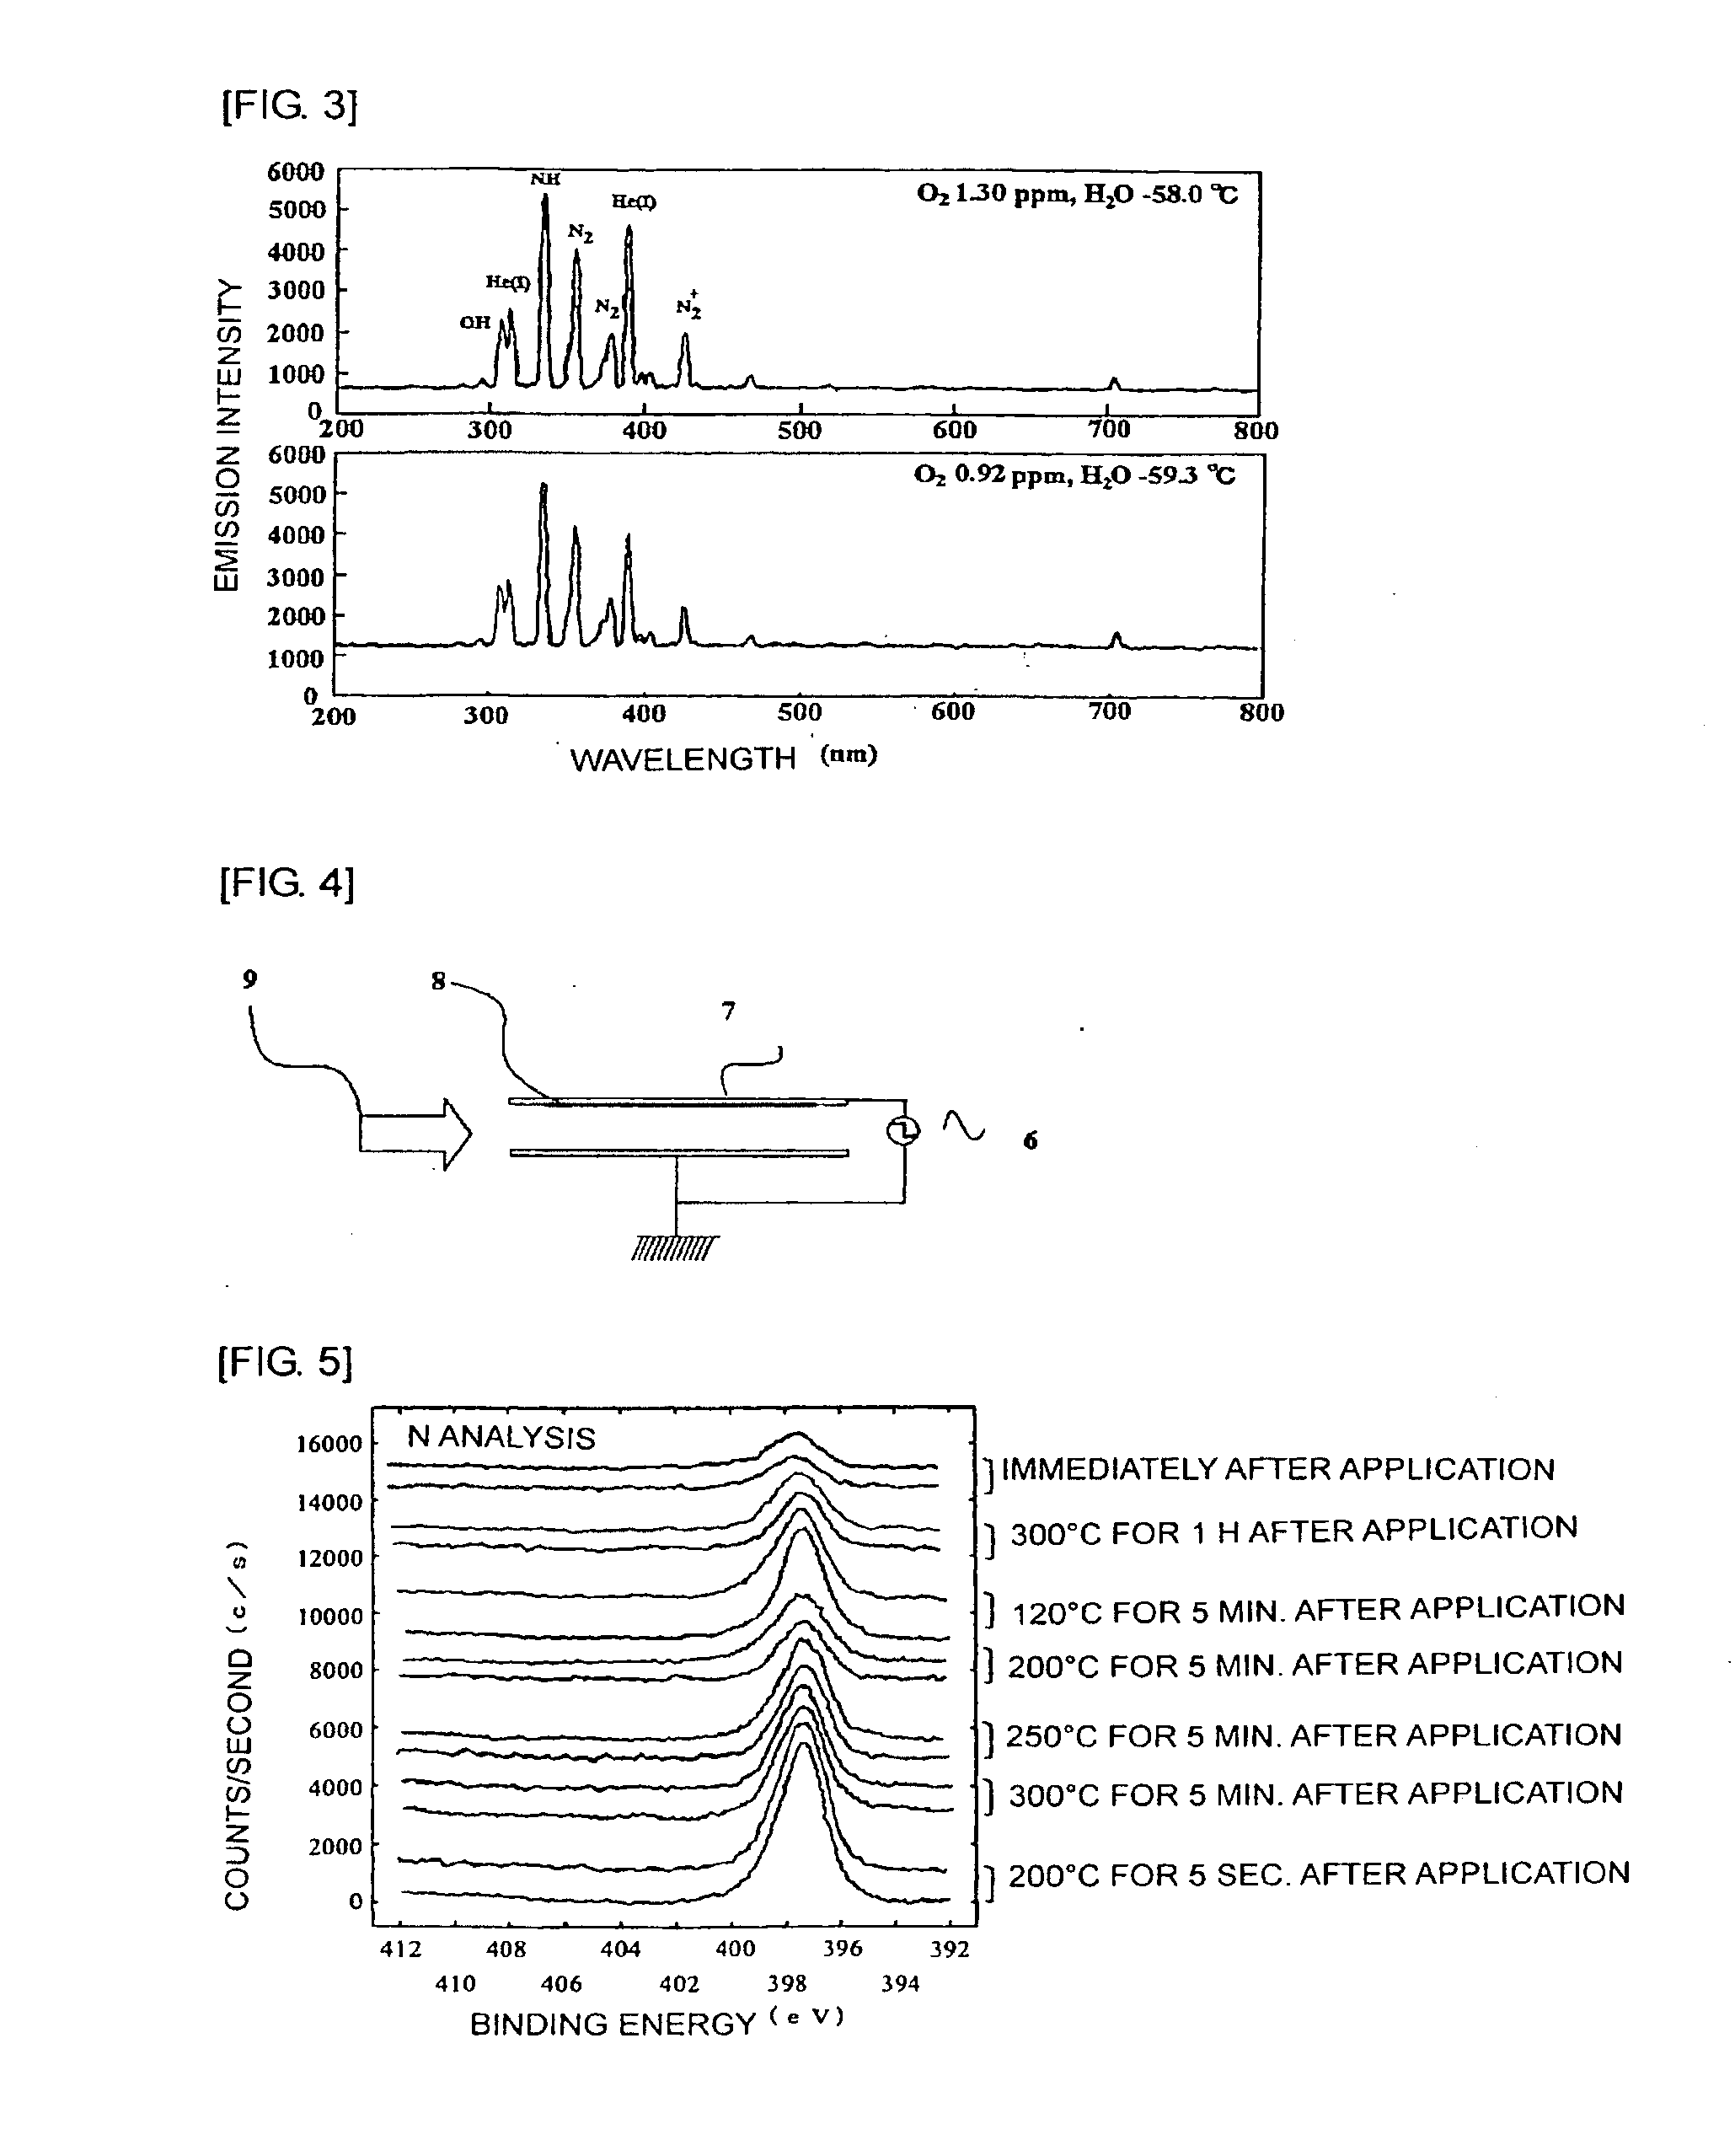 Method for forming bond between different elements